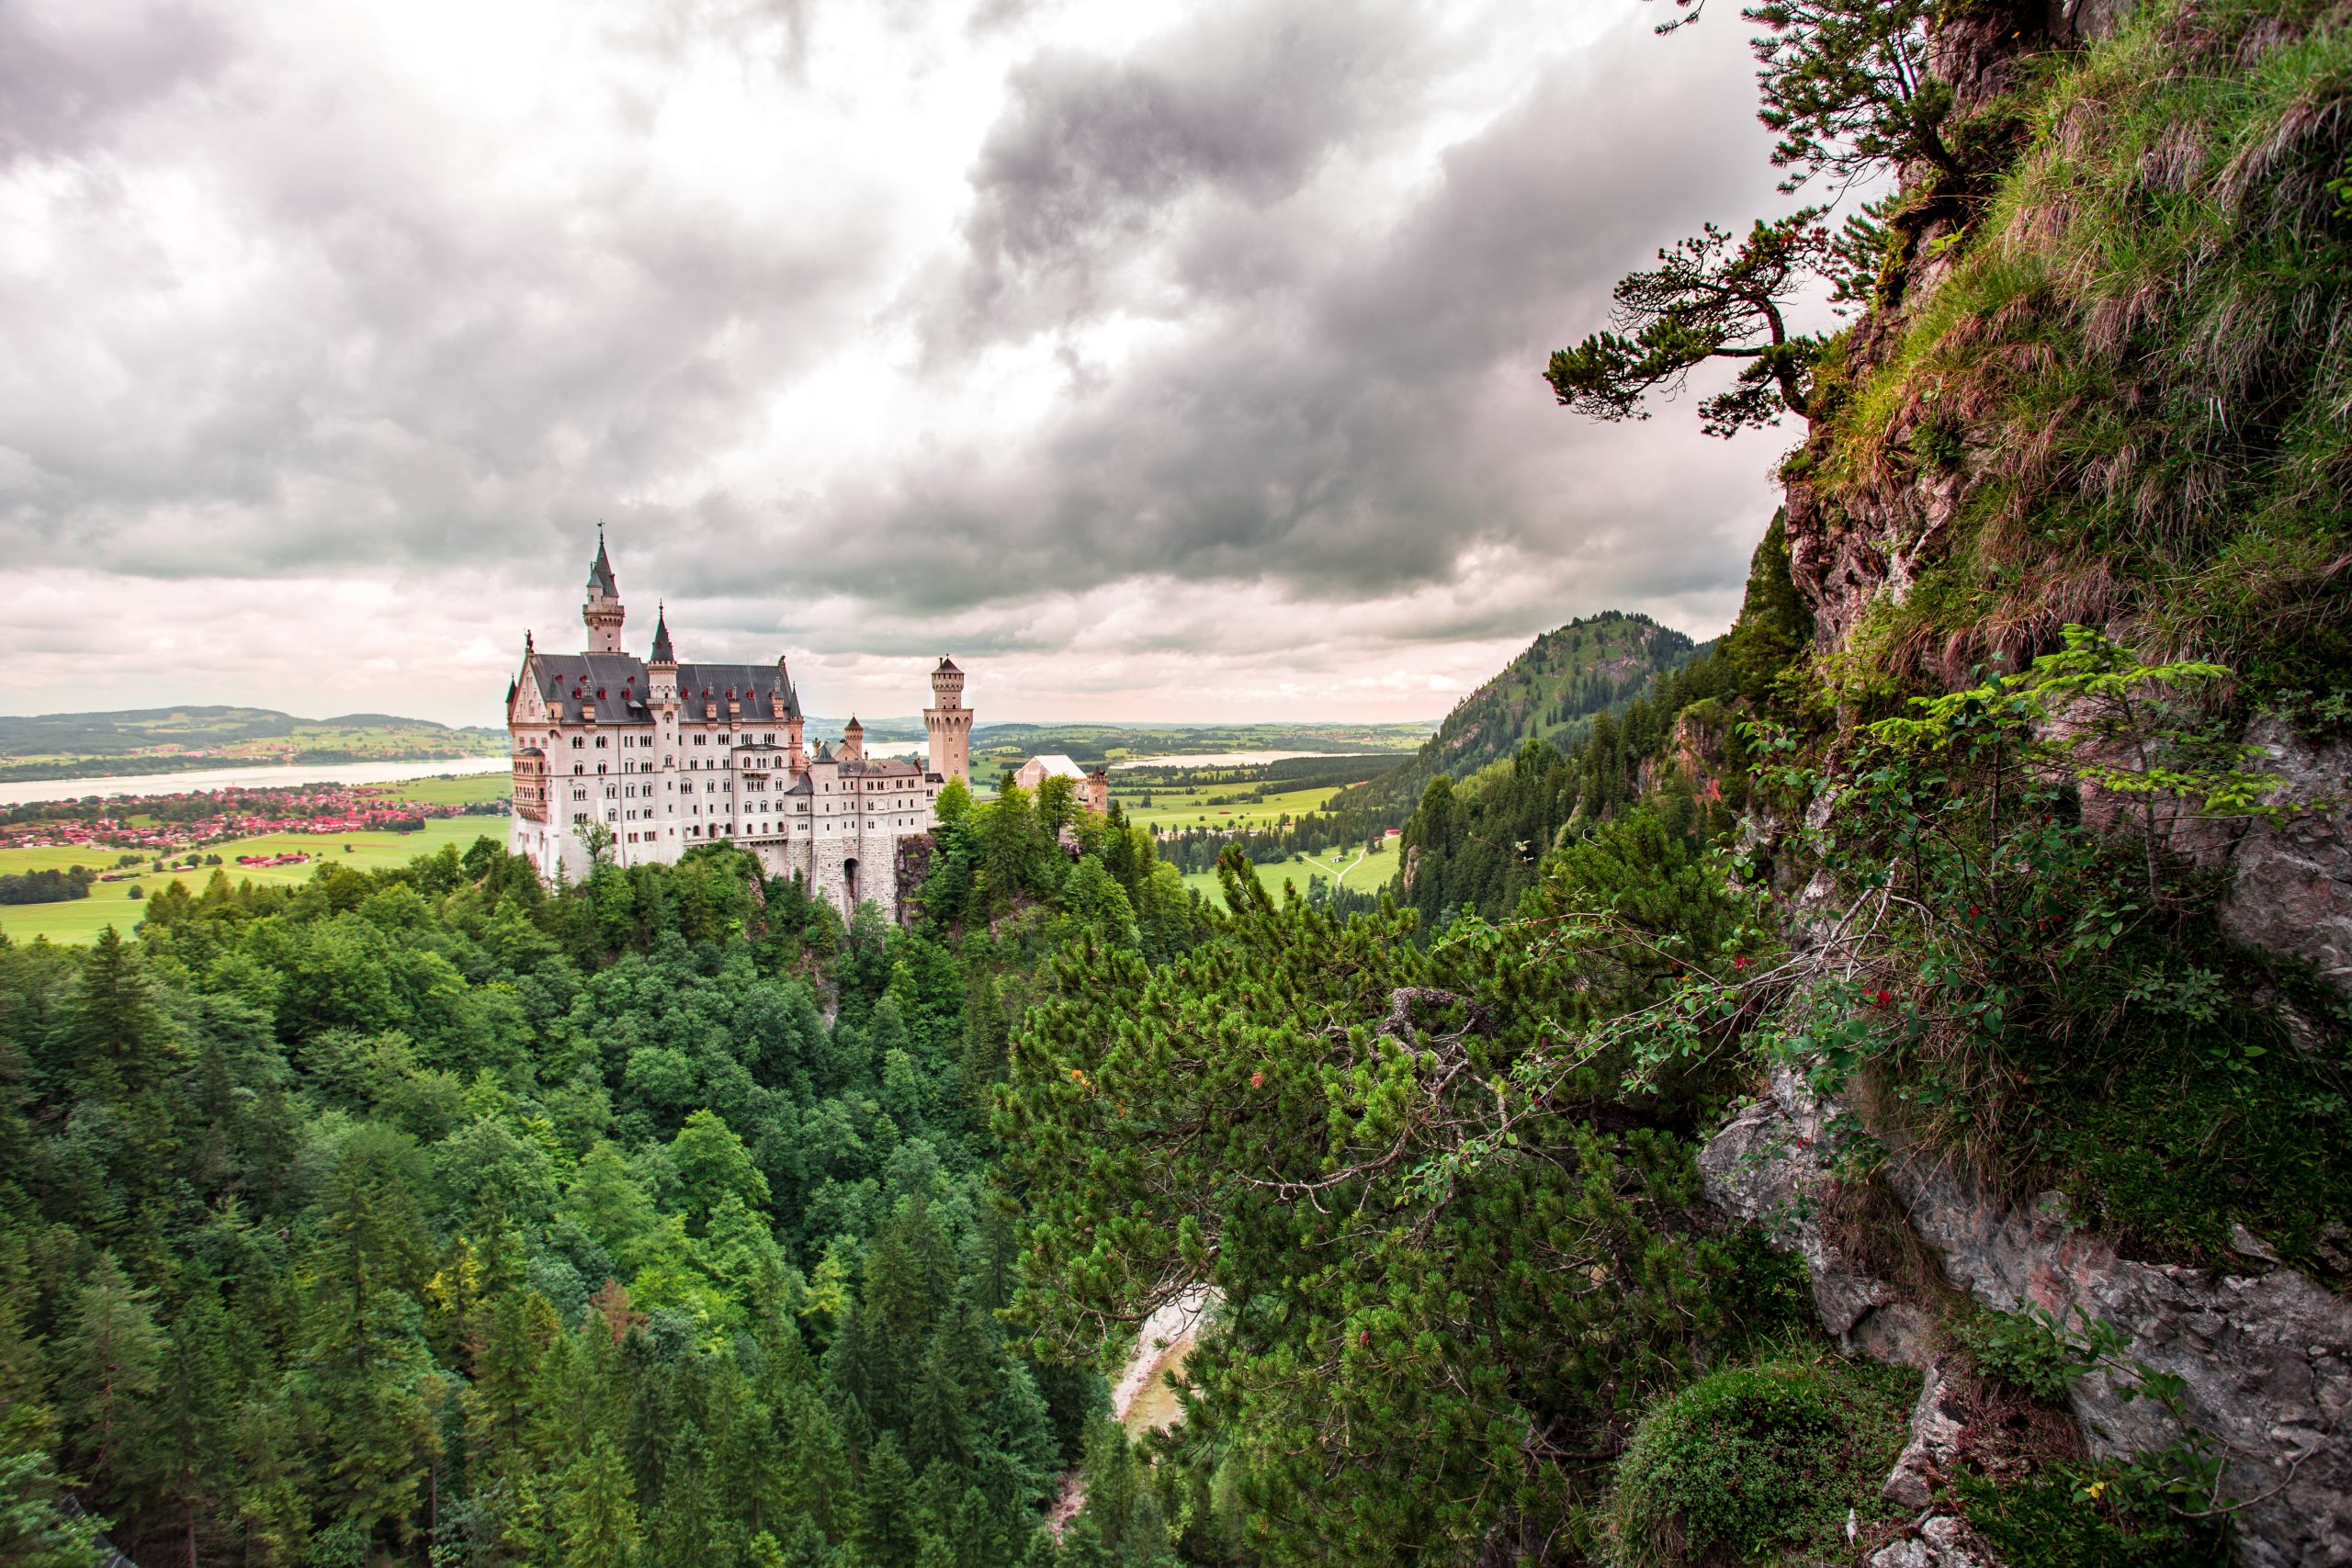 How to Get to the  Neuschwanstein Castle in Germany?